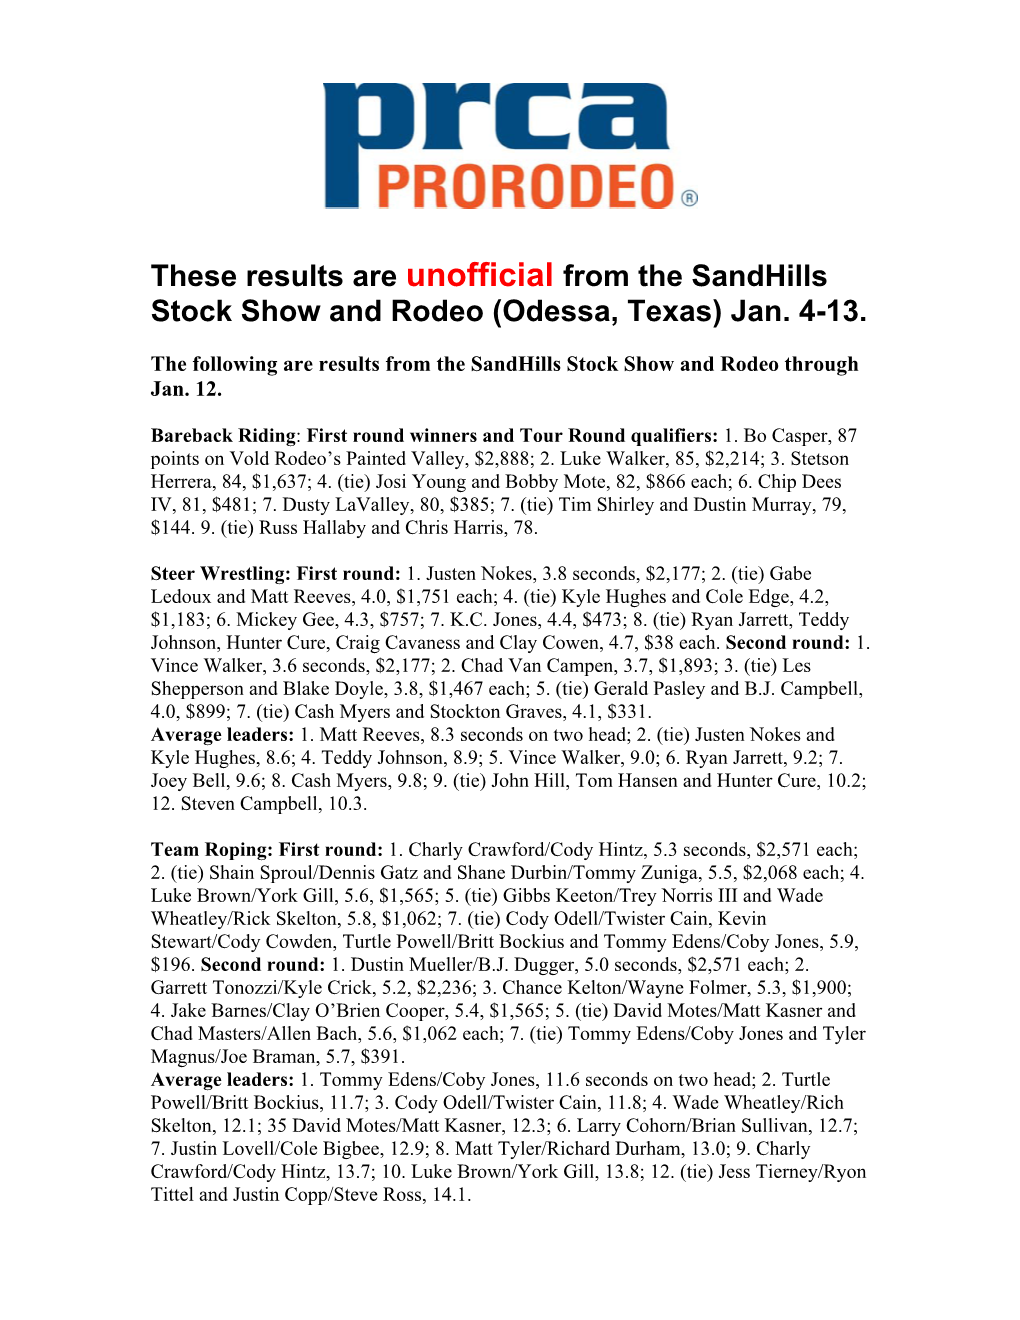 These Results Are Unofficial from the Sandhills Stock Show and Rodeo (Odessa, Texas) Jan